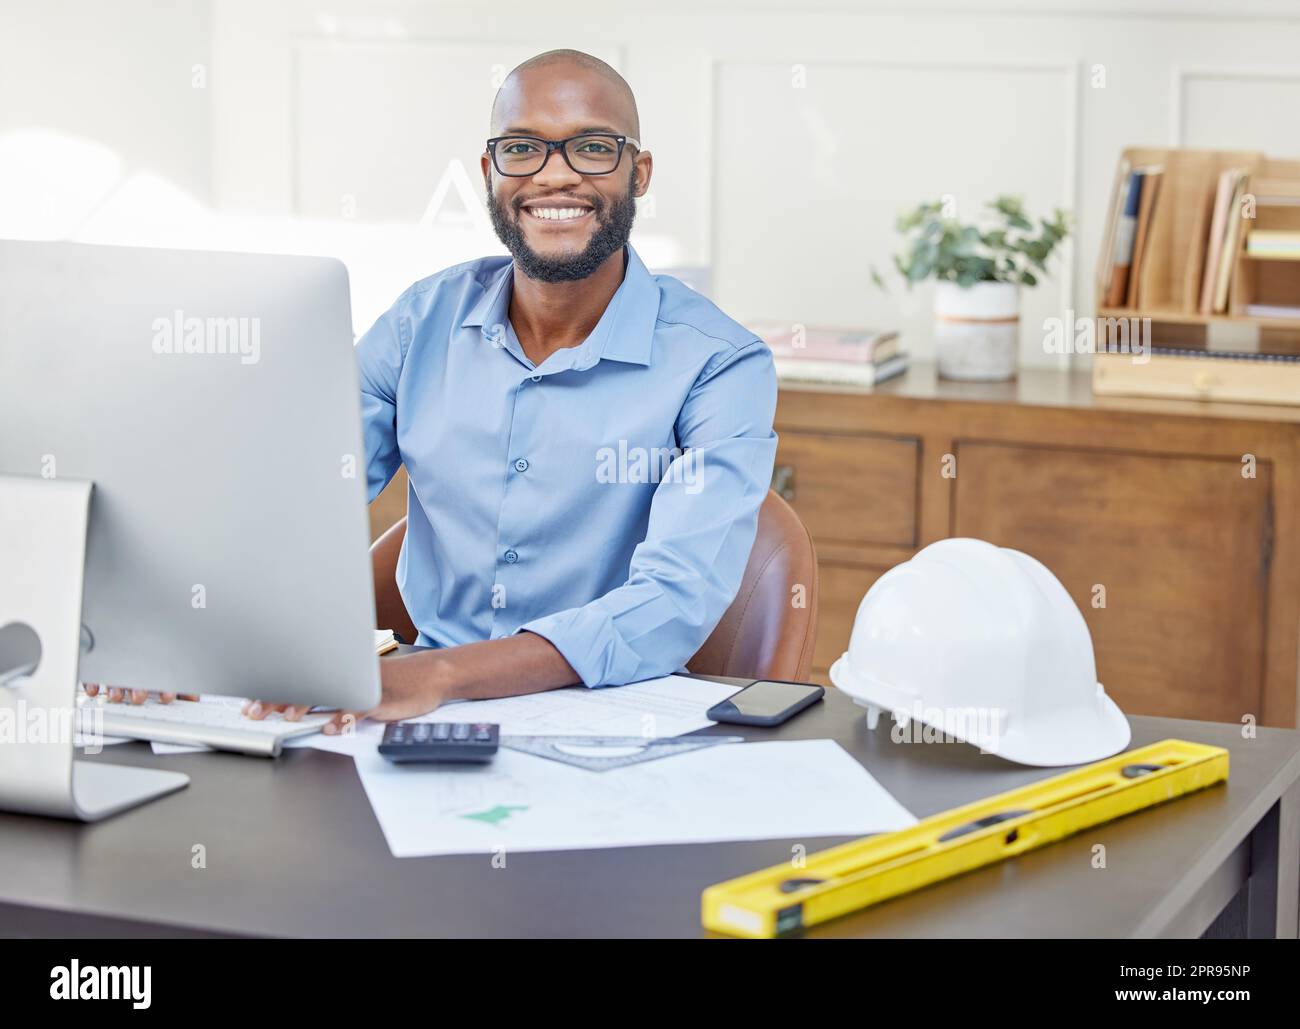 Wait till you see what we can do for you. Portrait of a businessman smiling while sitting at his desk. Stock Photo